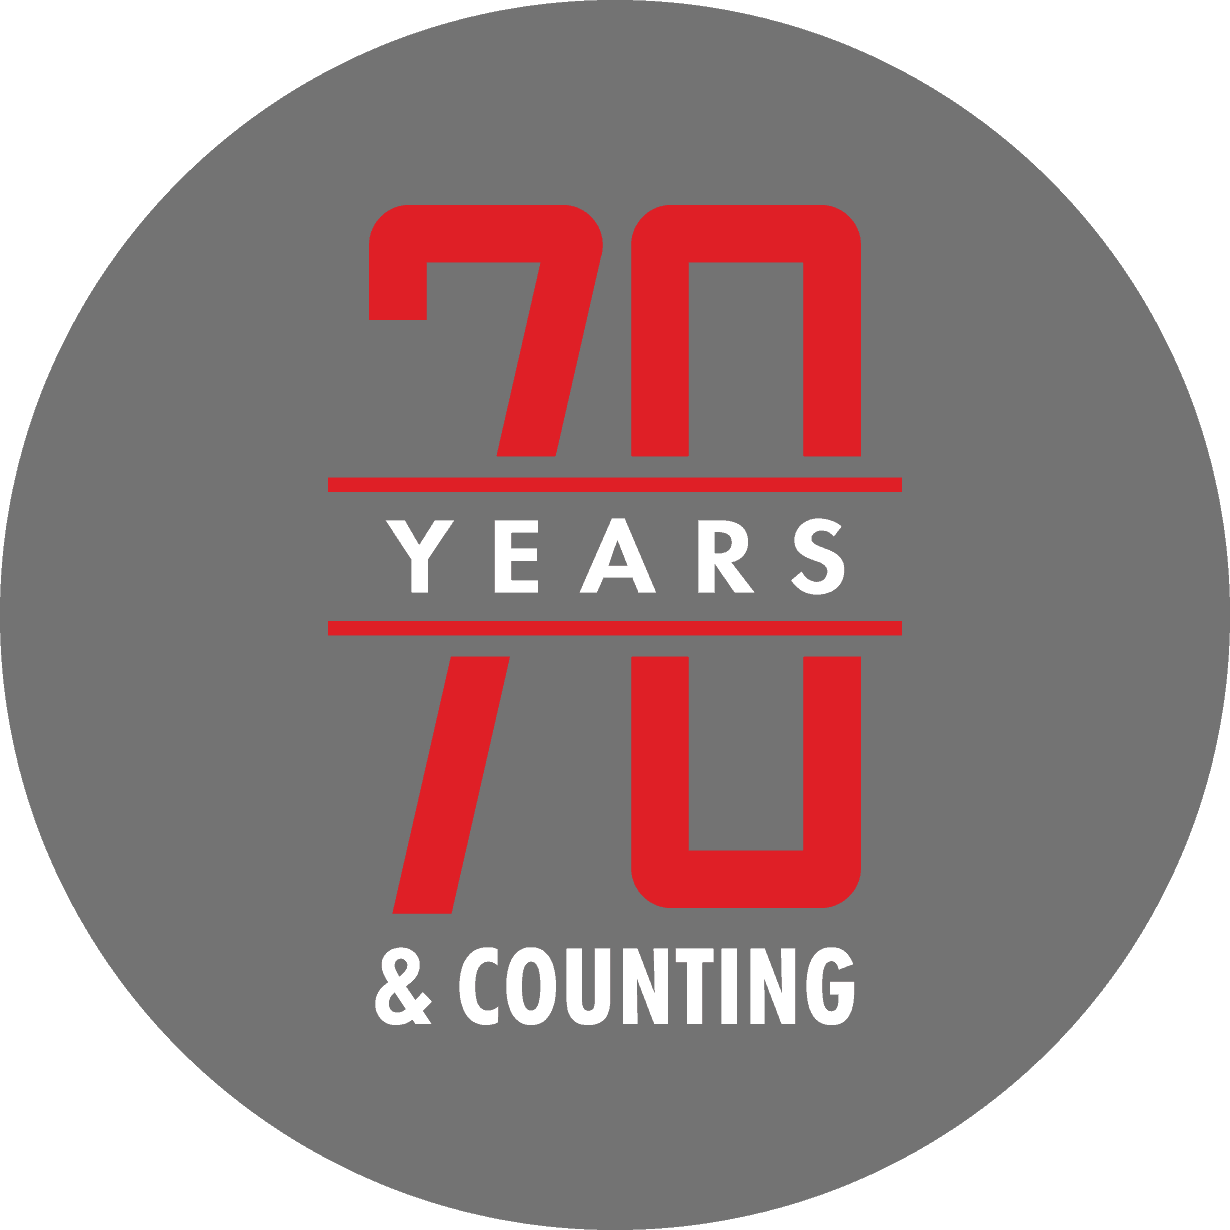 70 Years & Counting